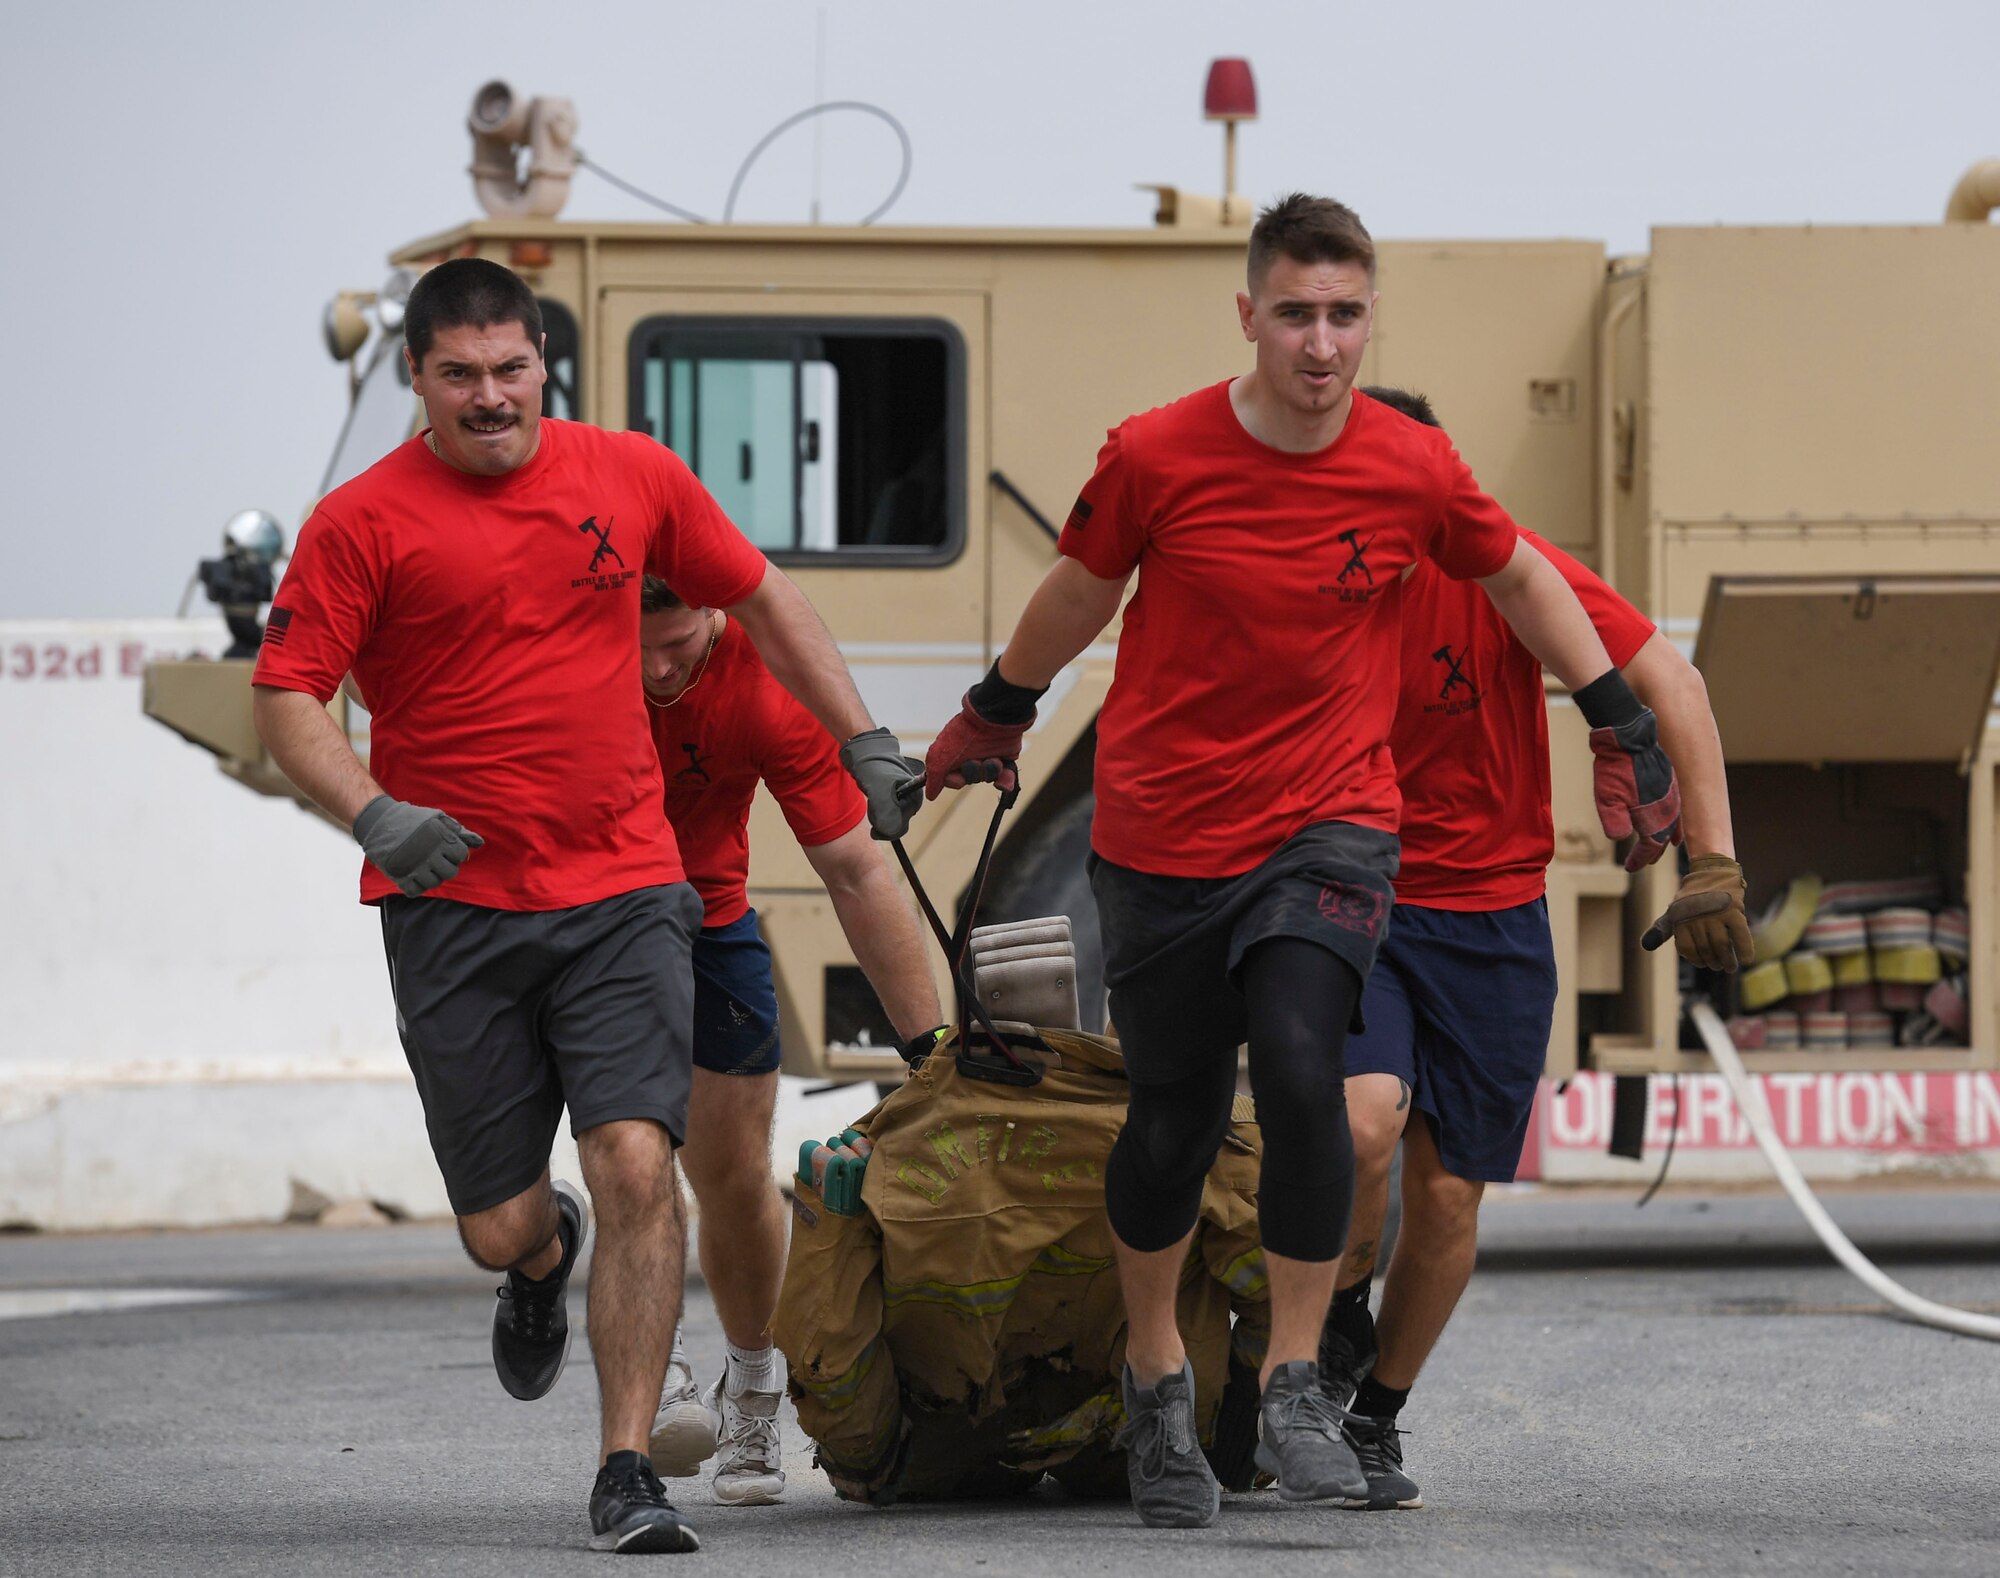 U.S. Air Force Airmen assigned to the 407th Expeditionary Civil Engineer Squadron drag a dummy during the Battle of the Badges event at Ahmed Al Jaber Air Base, Kuwait, Nov. 11, 2020.